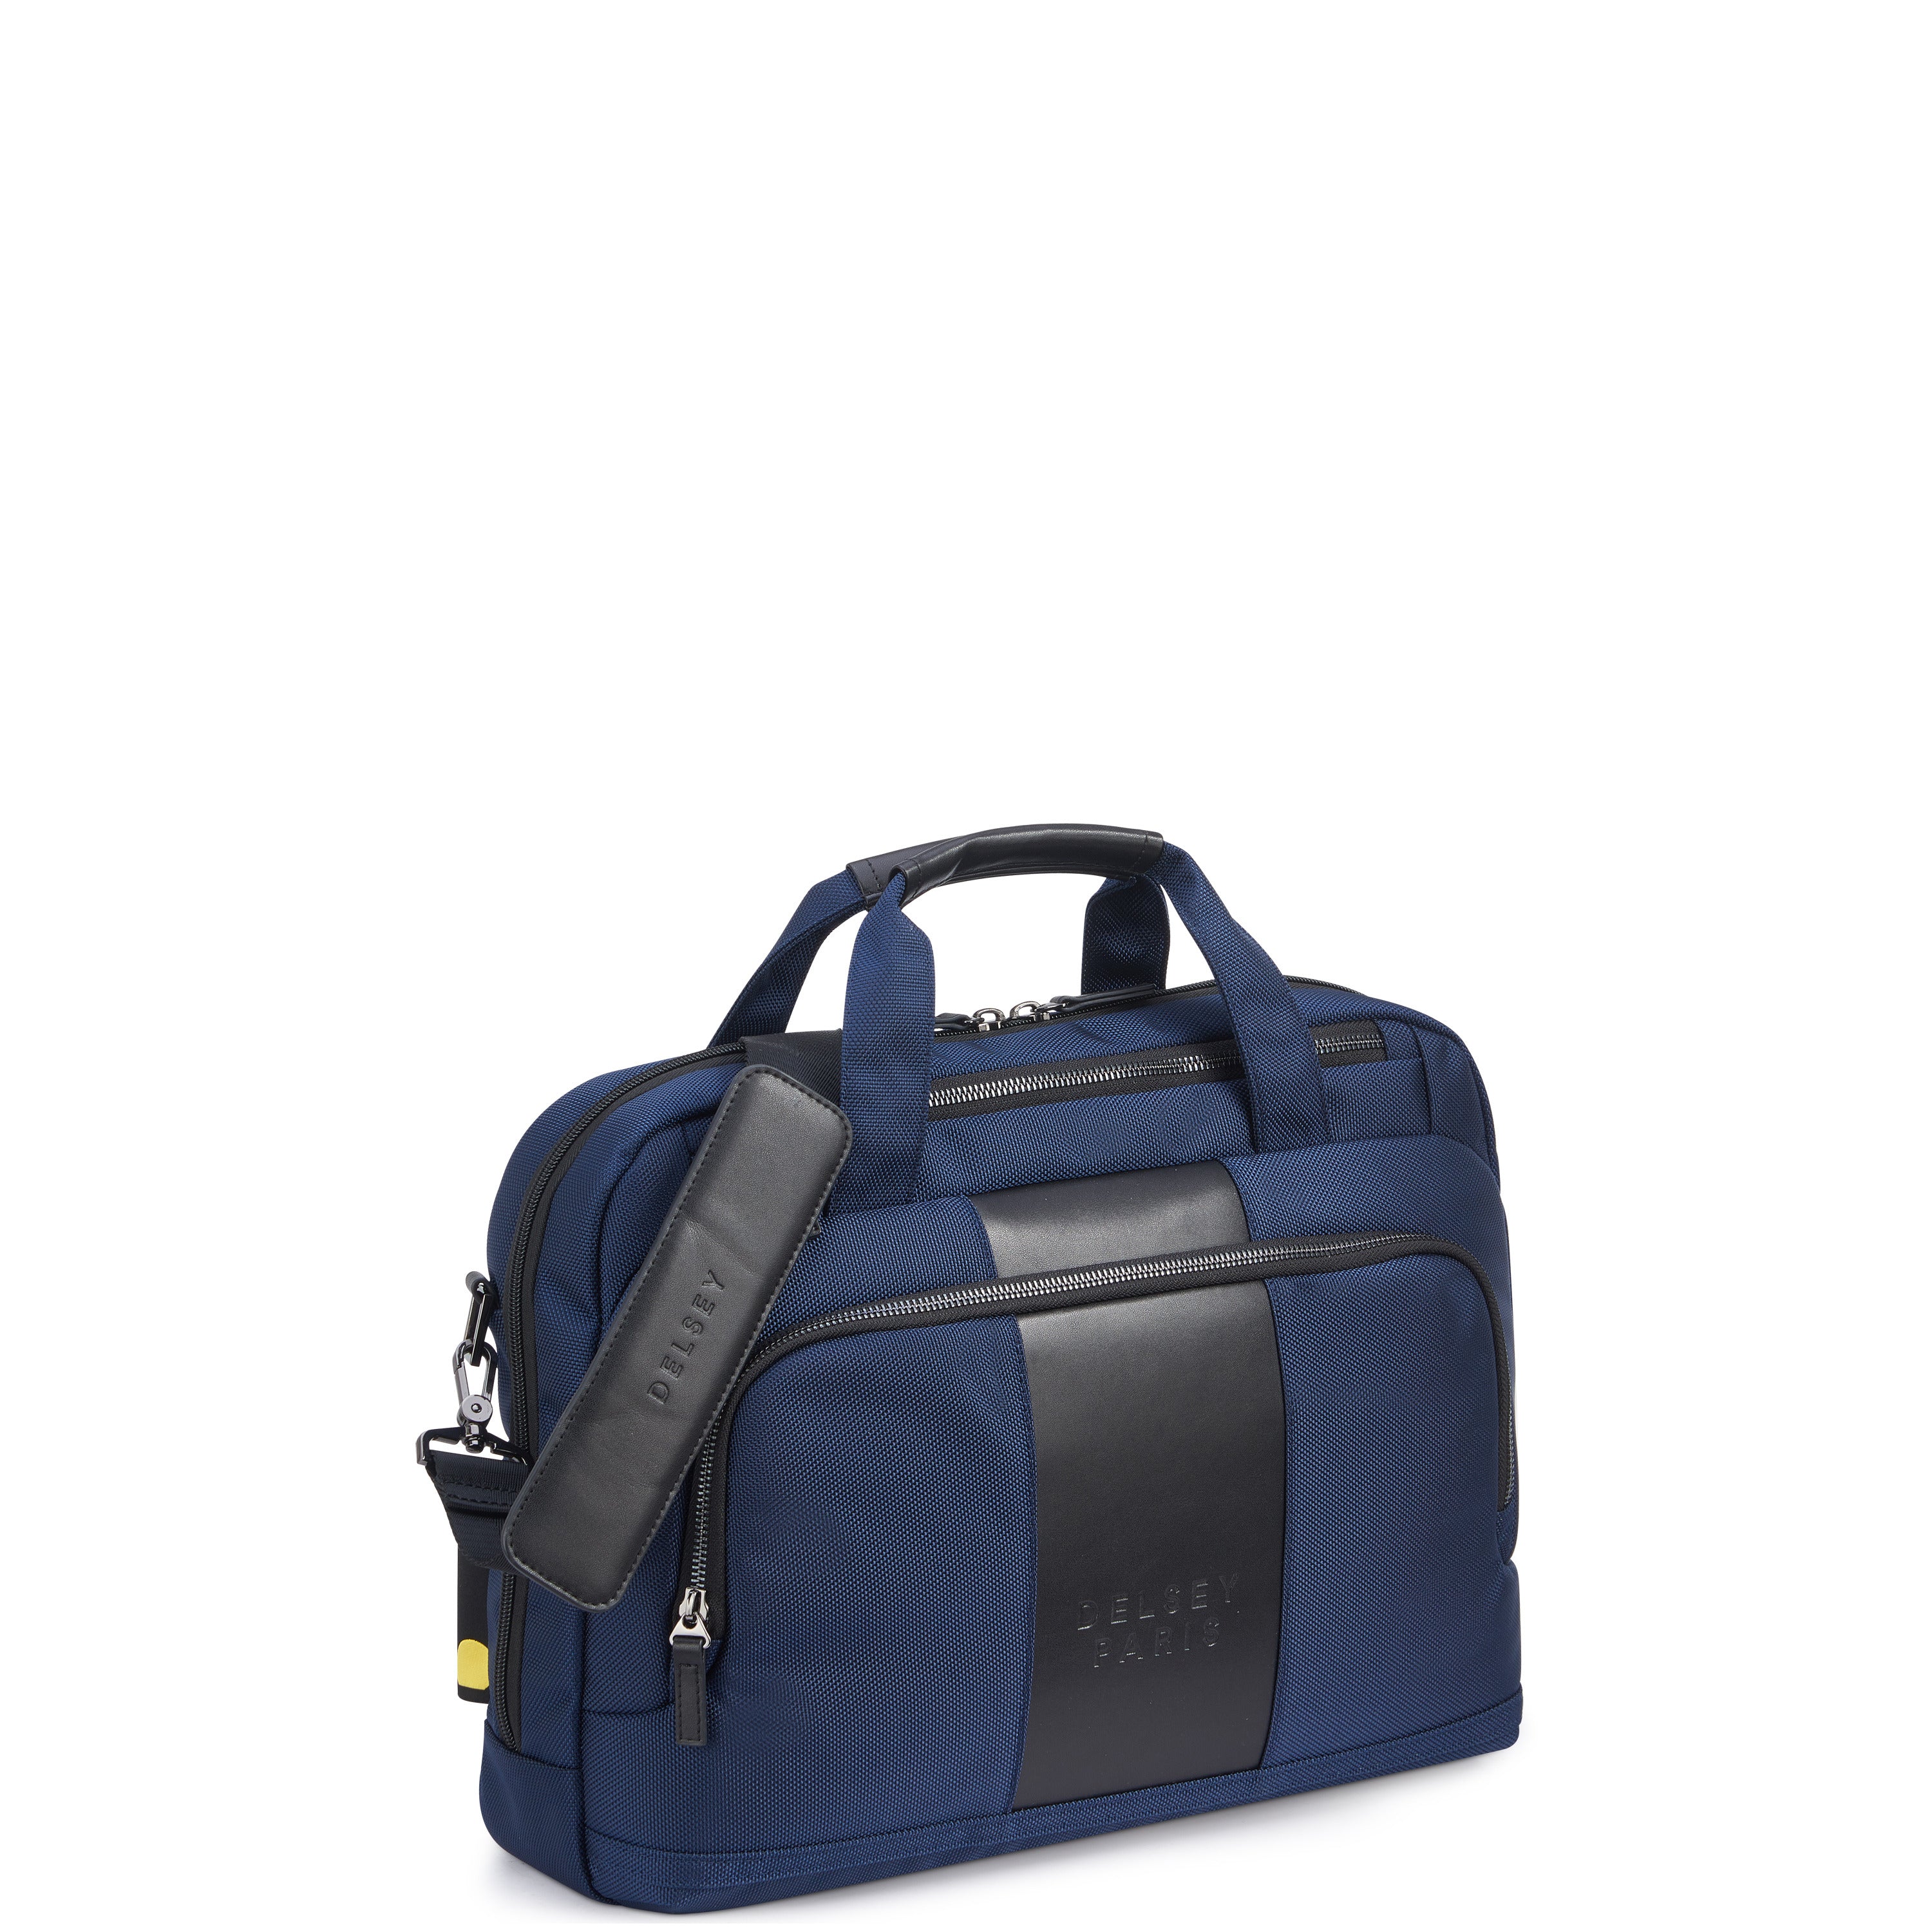 Delsey Wagram 1 Comparment Satchel Breifecase 15.6 inch Navy Blue - 00119916002